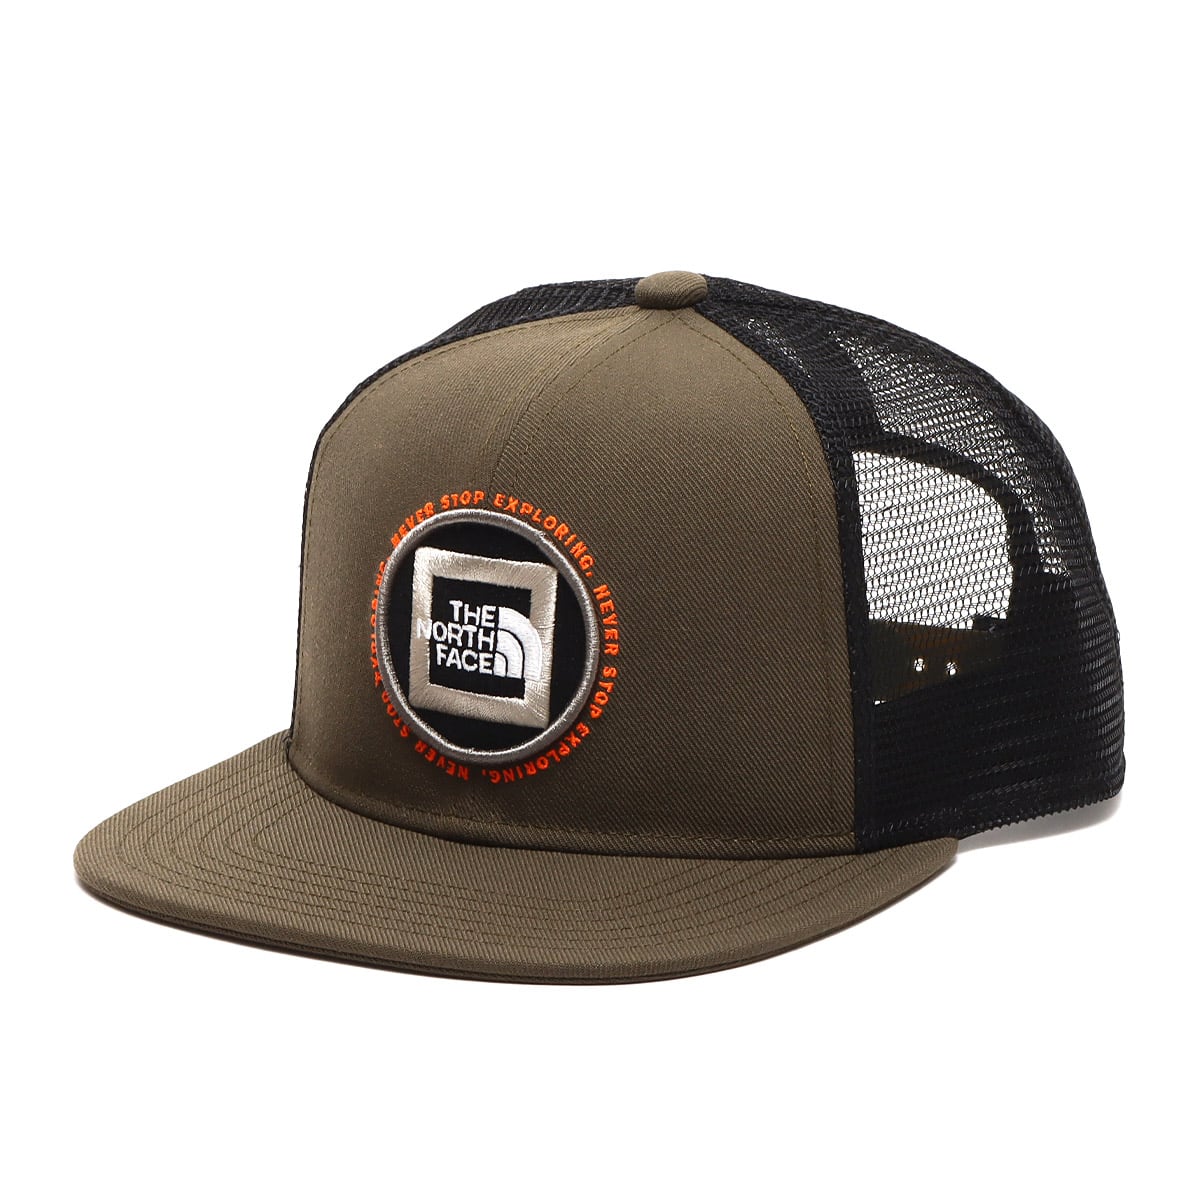 THE NORTH FACE  Message Mesh Cap